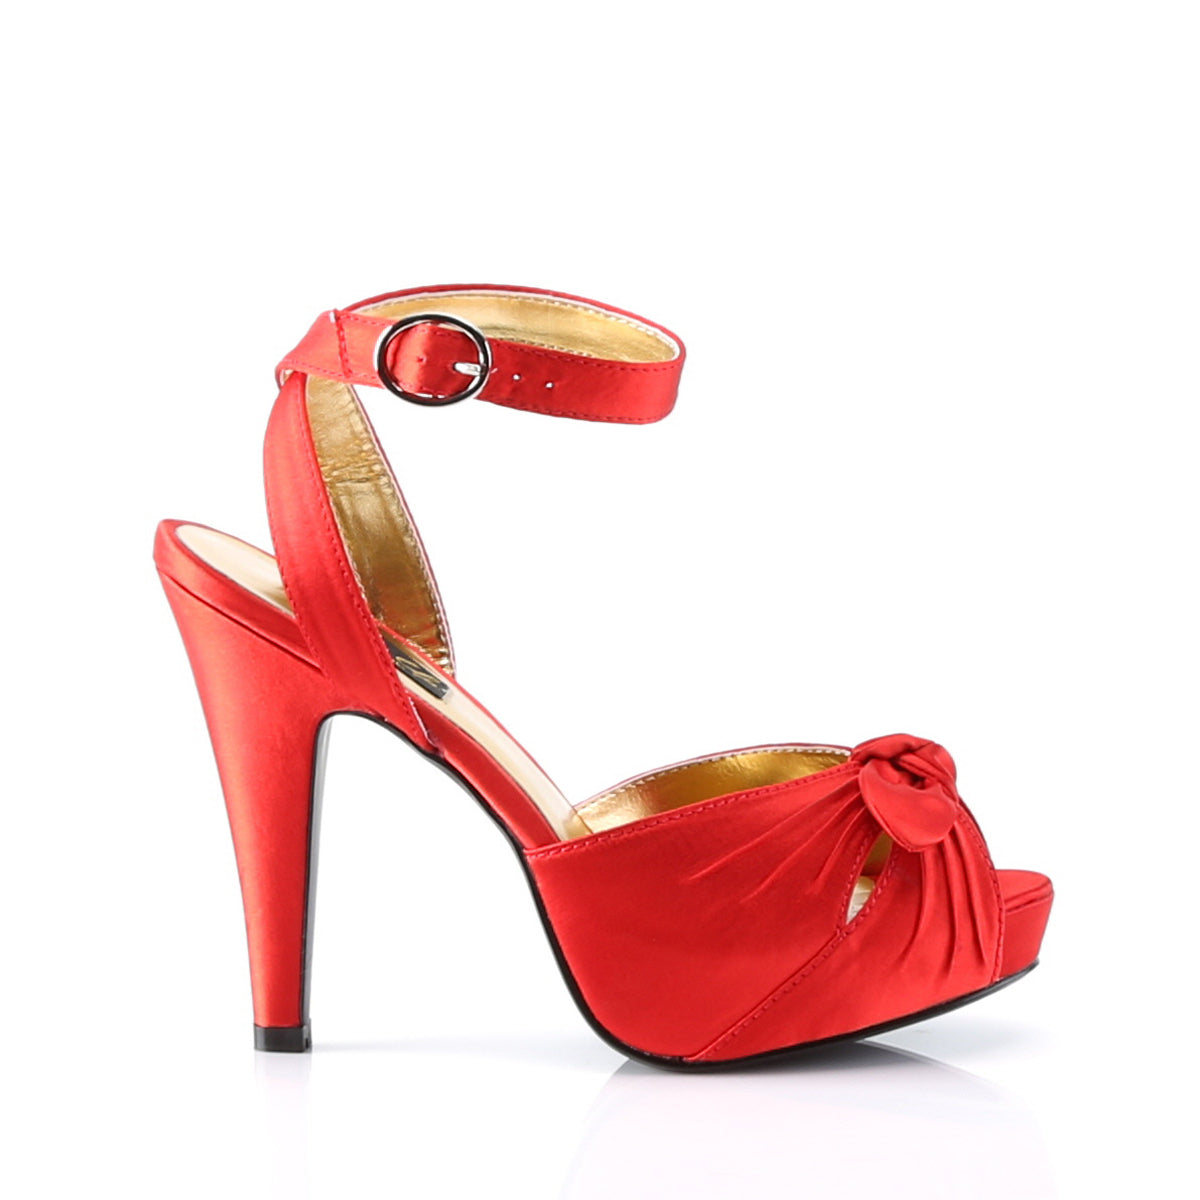 BETTIE-04 Retro Glamour Pin Up Couture Platforms Red Satin